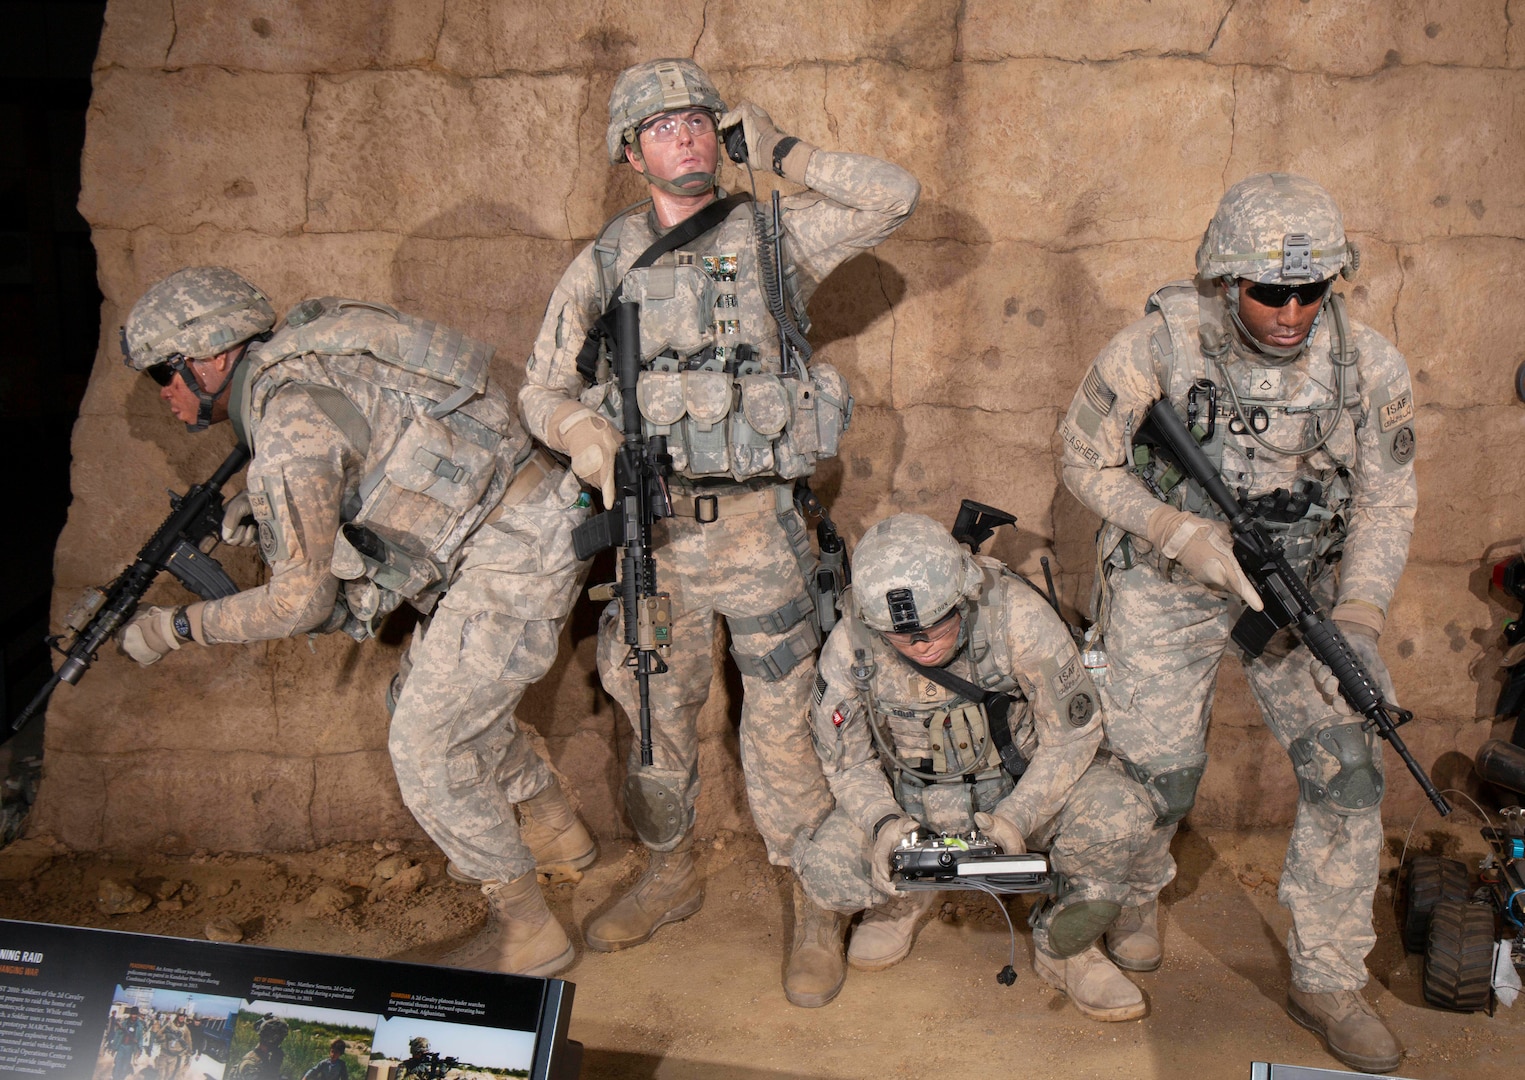 Three New York Army National Guard Soldiers served as the models for the figures in this display in the National Museum of the United States Army at Fort Belvoir, Virginia. Maj. Robert Freed posed for the figure holding the radio, Maj. (Chaplain) James Kim was the model for the crouching figure, and Sgt. 1st Class Jonathan Morrison was the model for the rifleman at the right of the tableau.